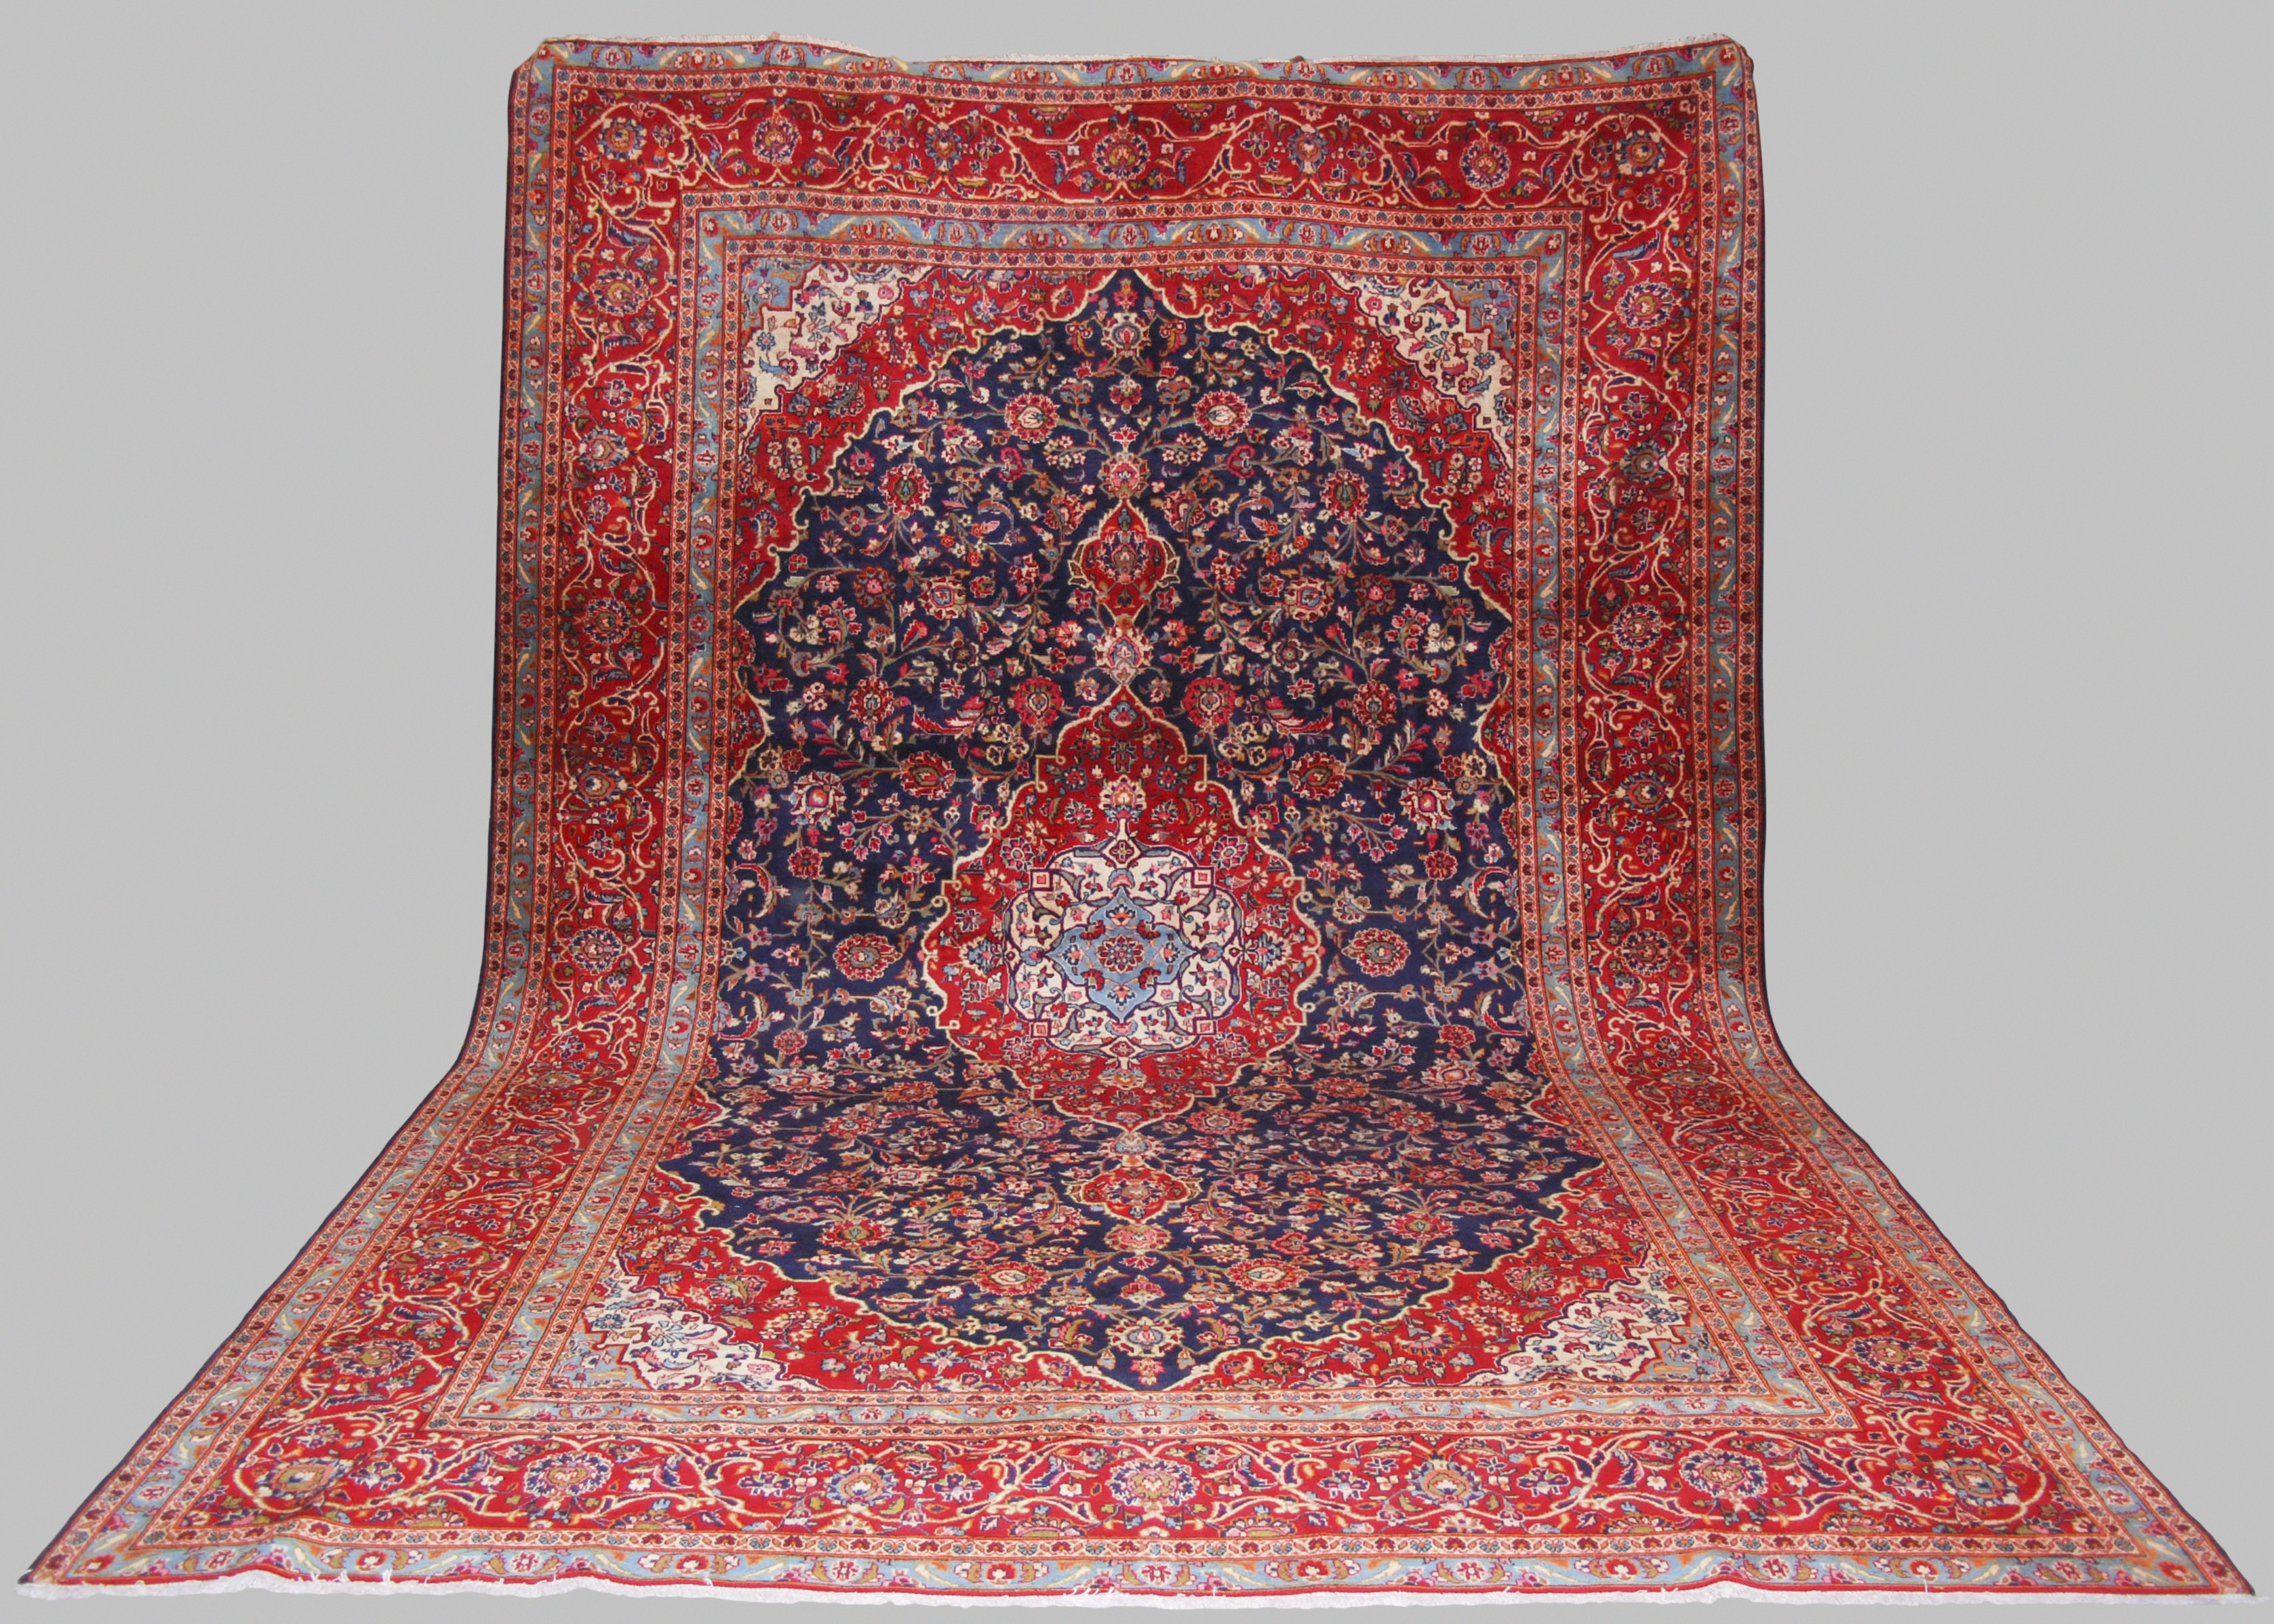 A Persian carpet, Kashan, 20th century, the rectangular blue ground field centred with an oval-